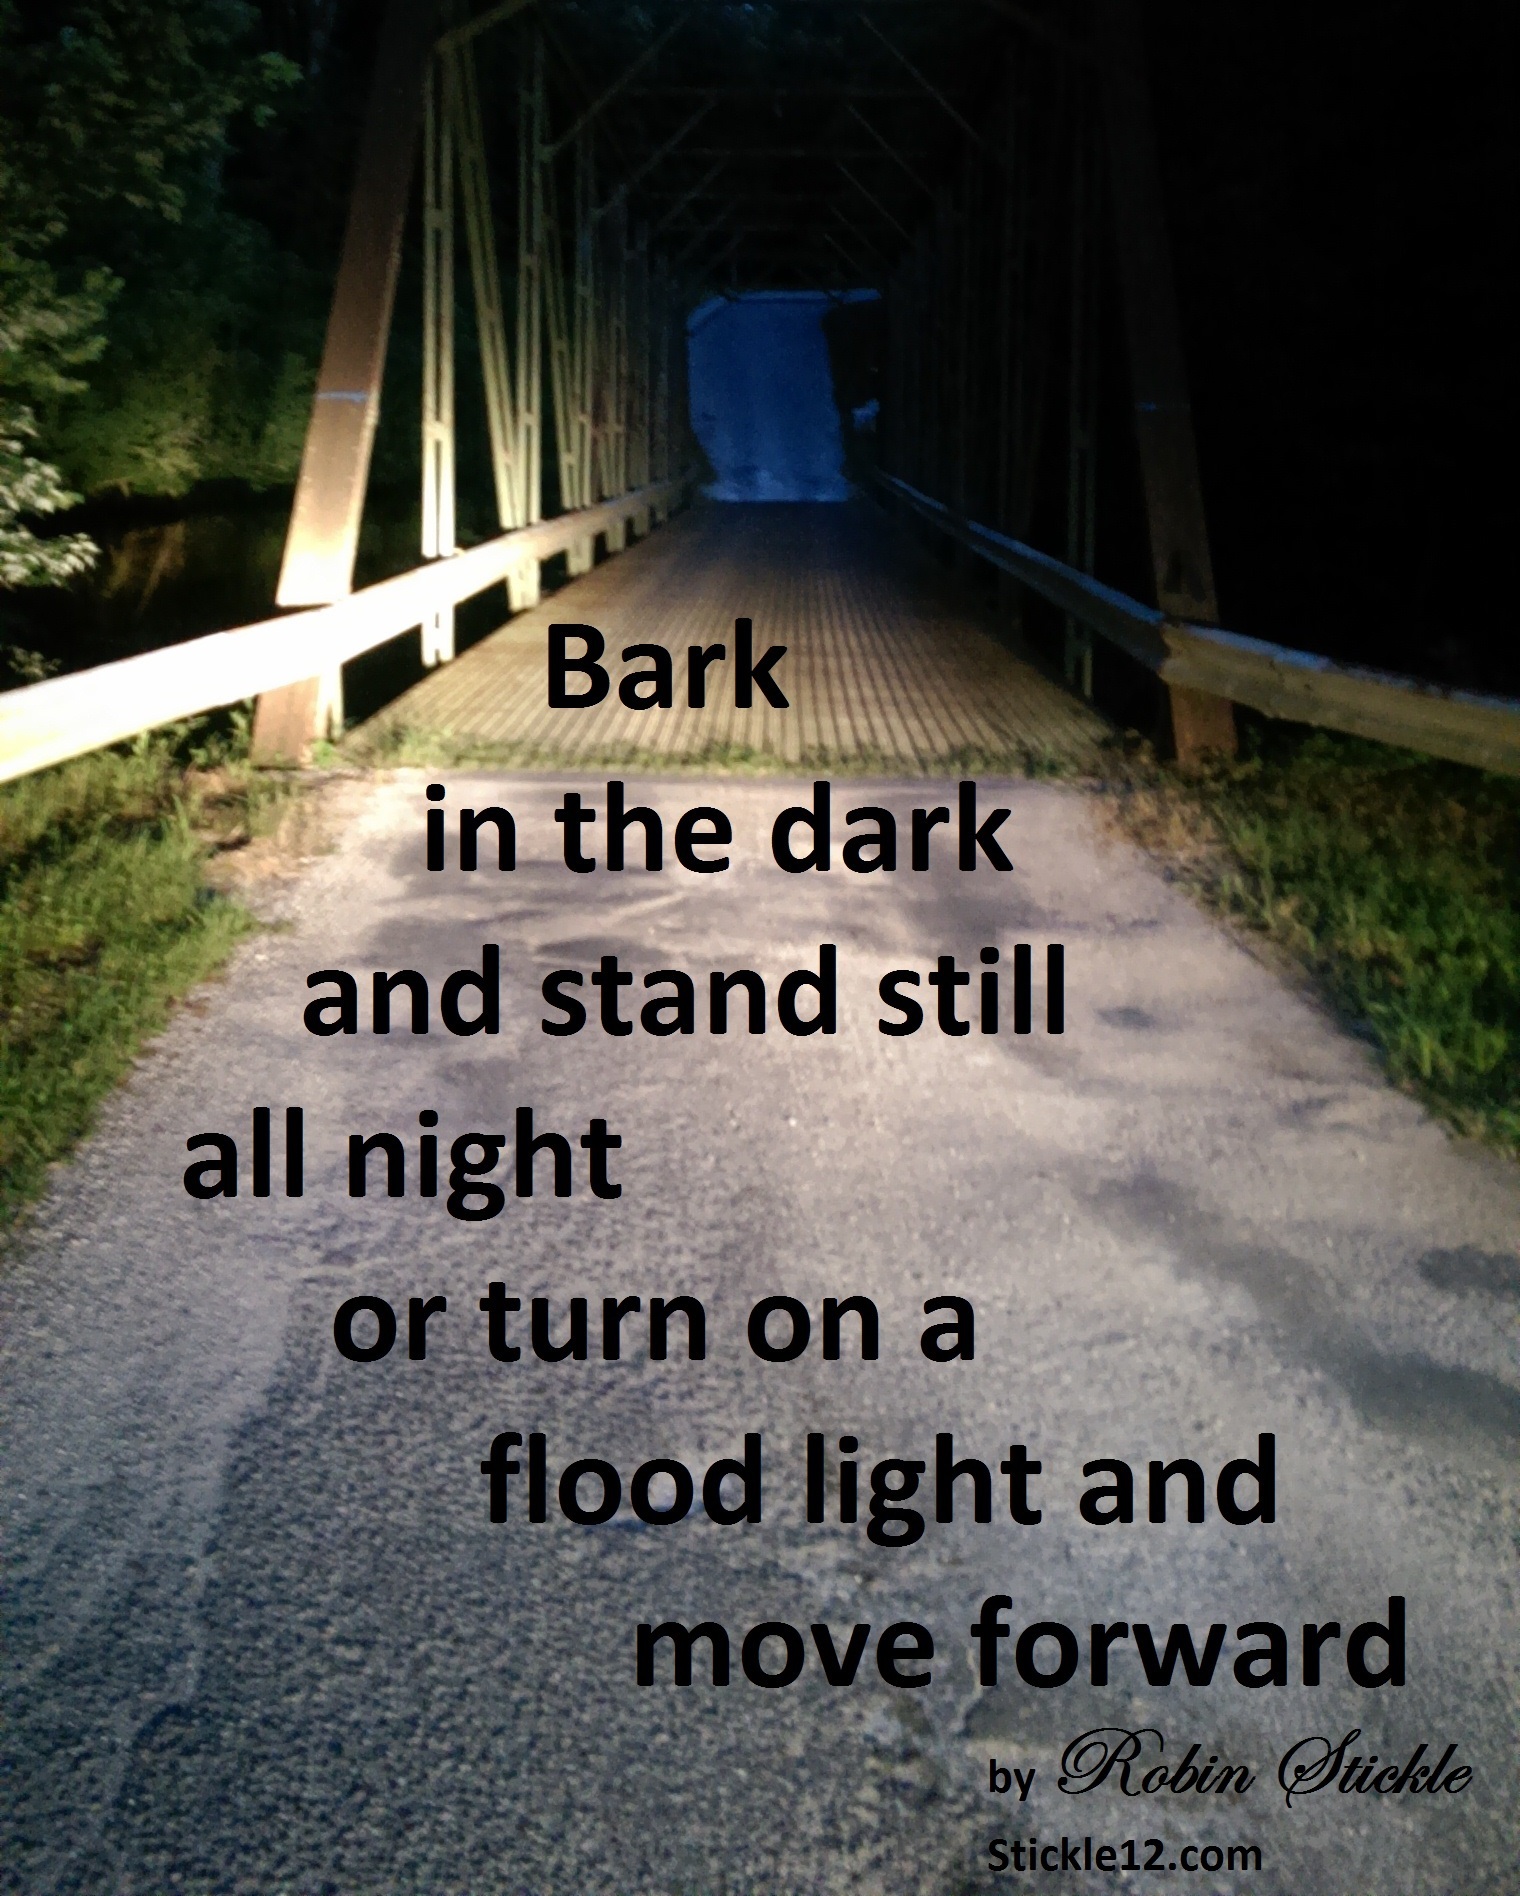 Meme on taking action. Picture - spotlight shining across a bridge at night with a steep grade showing on the other side. Words are "Bark in the dark and stand still all night or turn on a flood light and move forward" signed "by Robin Stickle Stickle12.com